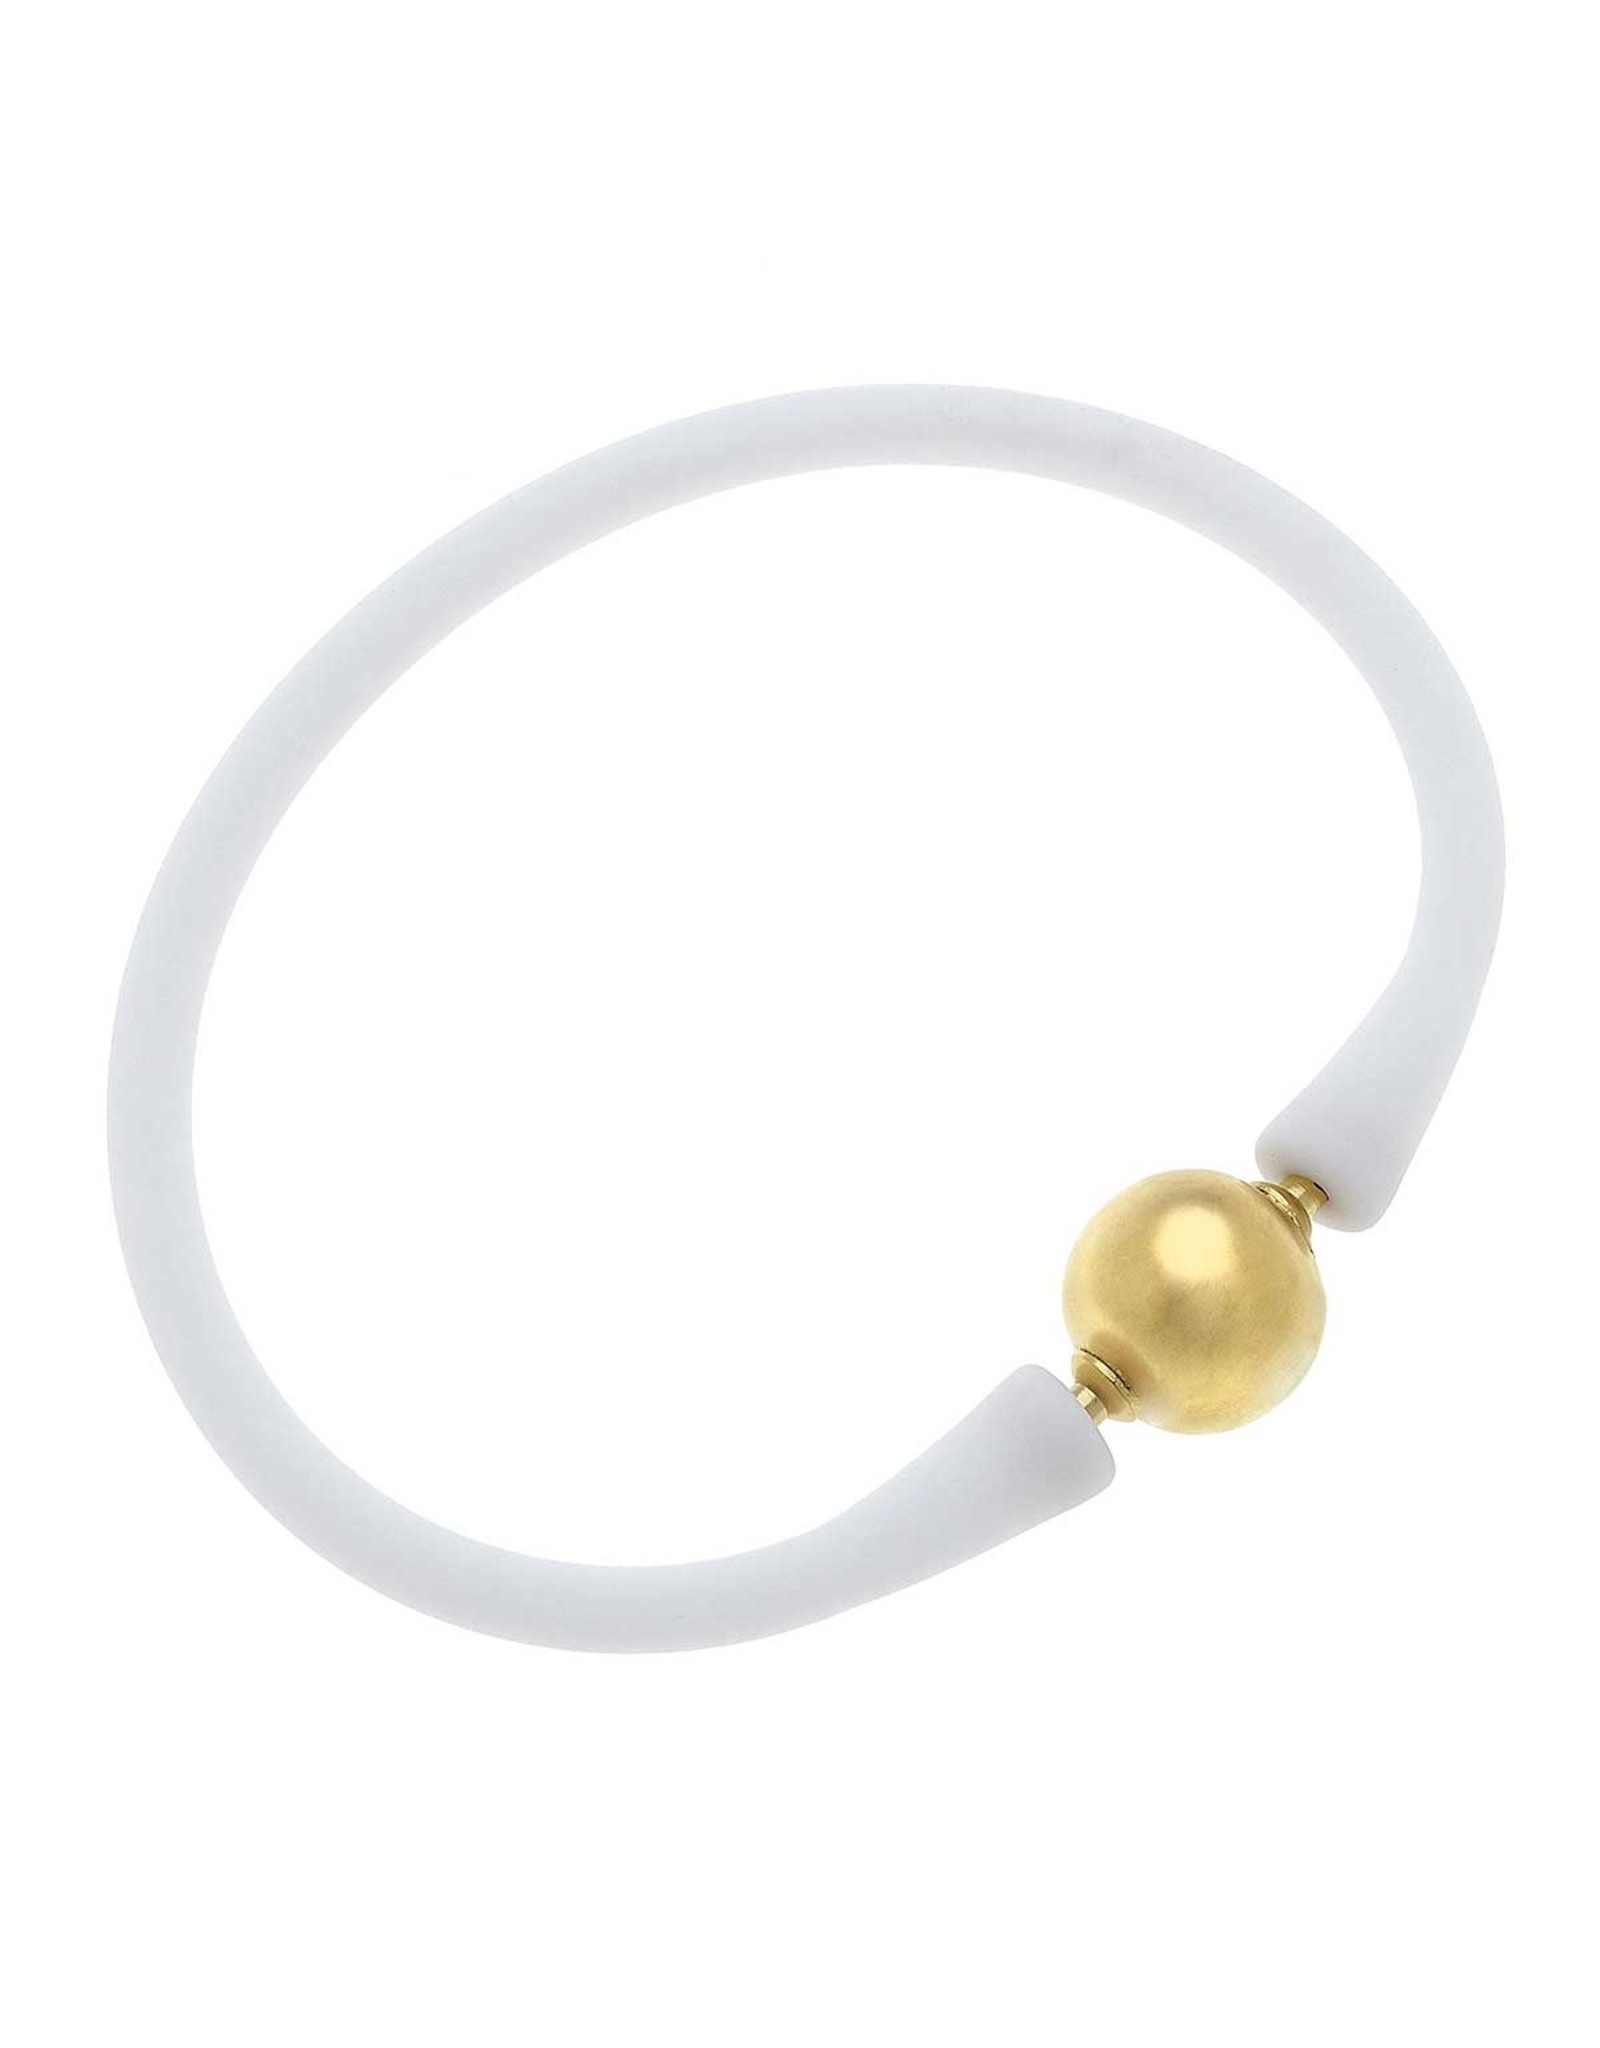 Bali 24K Gold Plated Ball Bead Silicone Bracelet in White